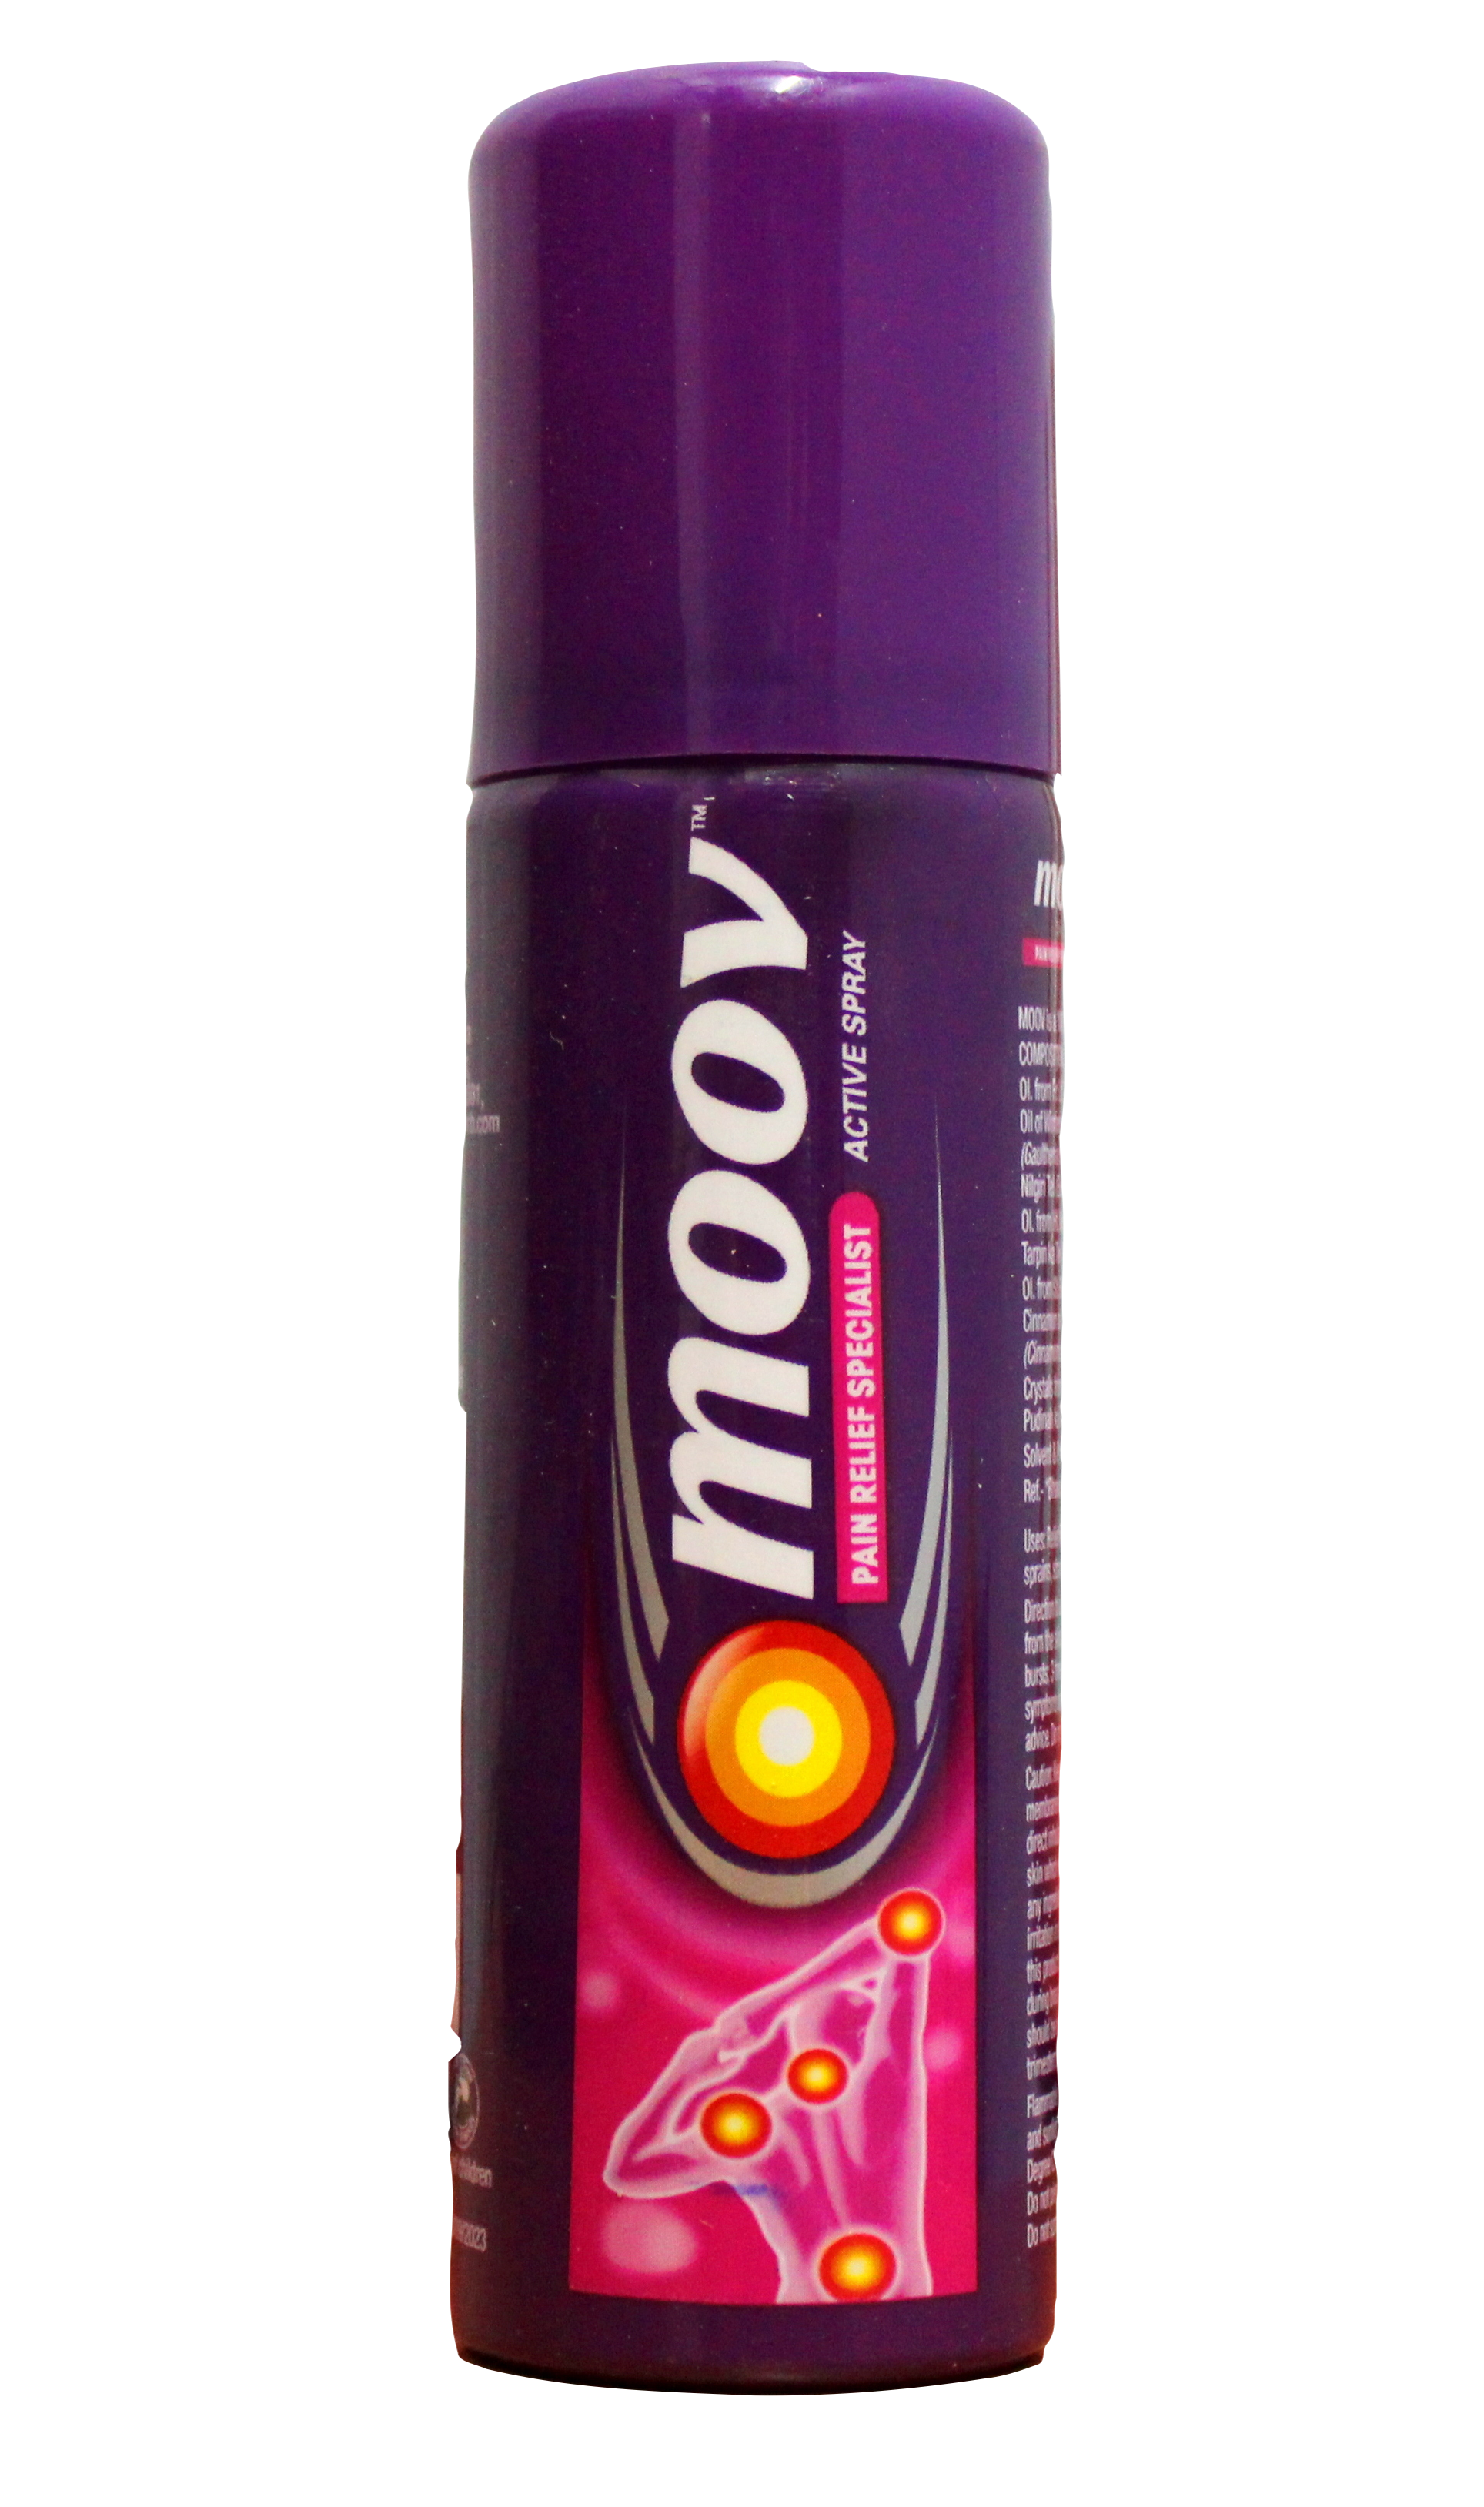 Shop Moov pain relief spray 35gm at price 140.00 from Reckitt Online - Ayush Care